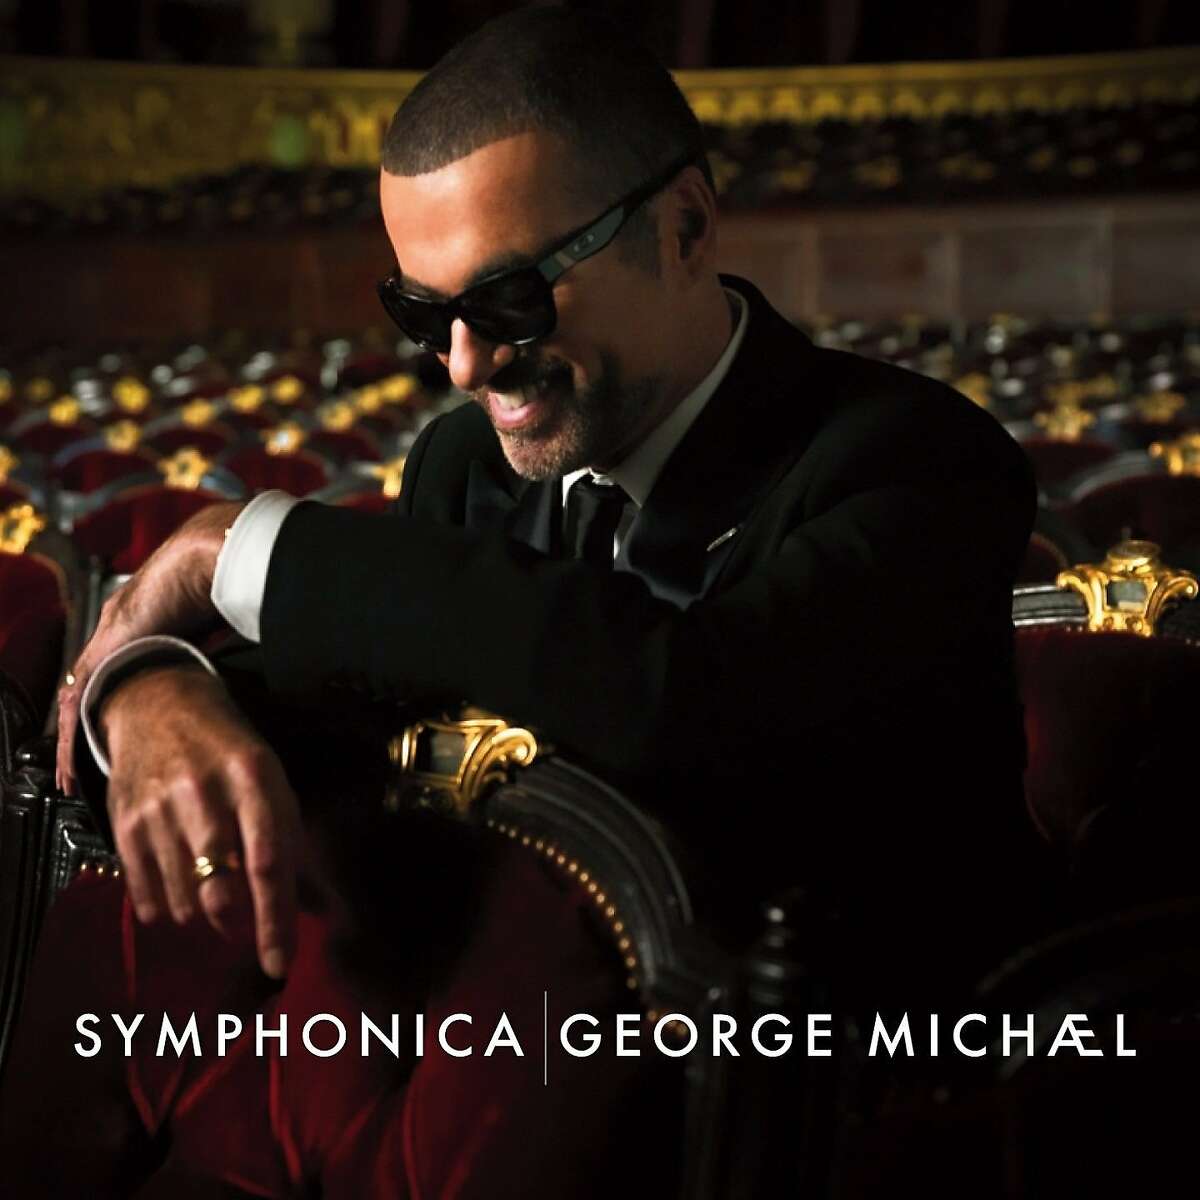 cd cover: "Symphonica" by George Michael